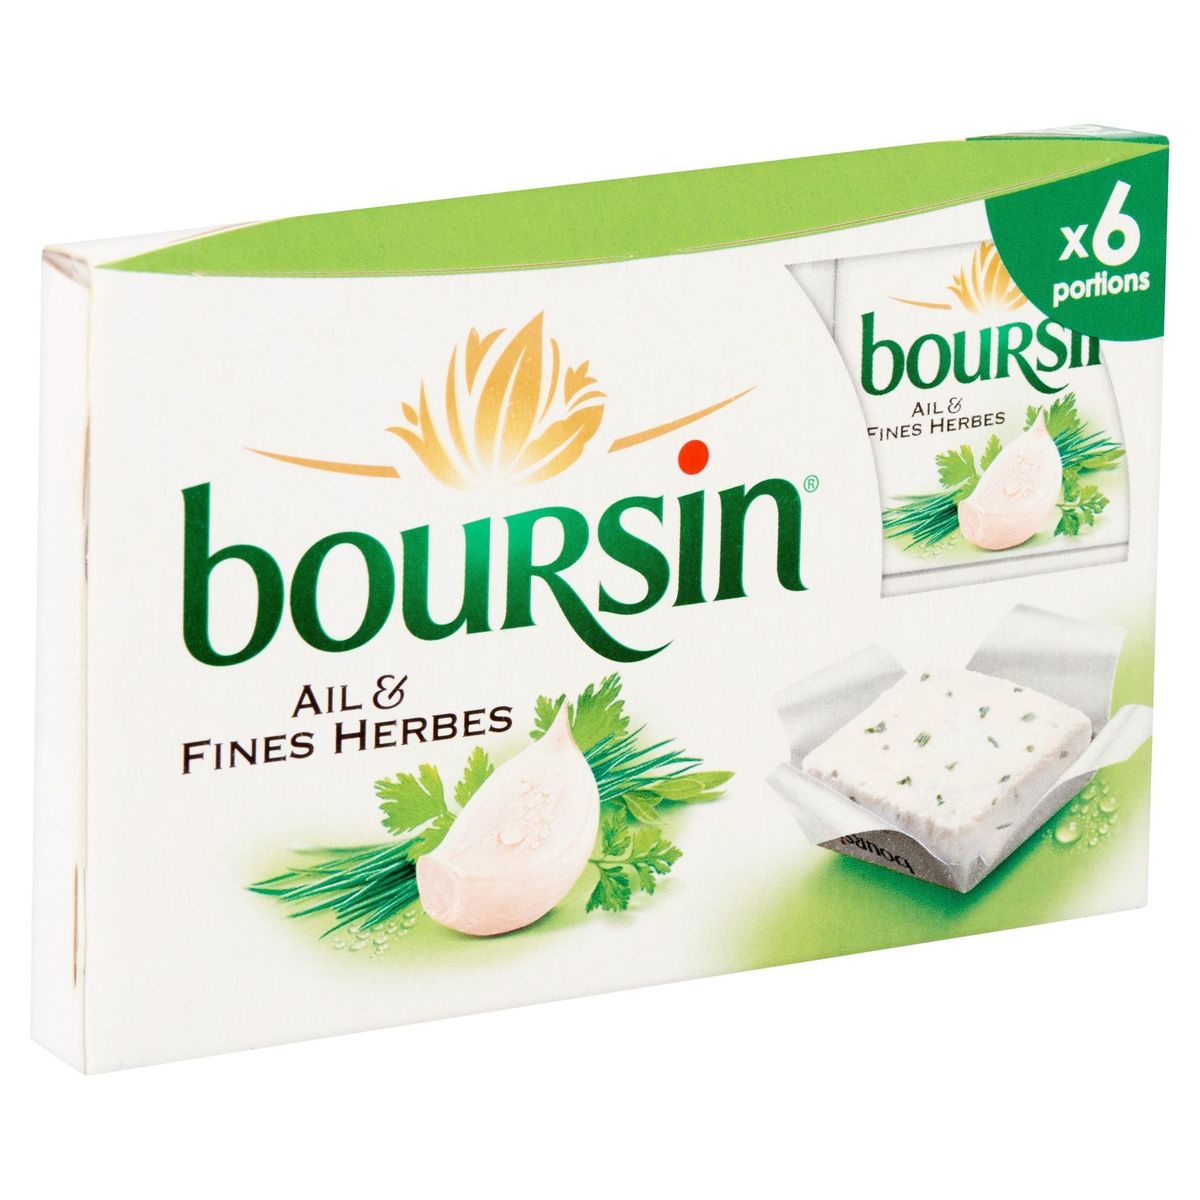 Boursin Fromage frais Ail & Fines Herbes 6 portions 96 g